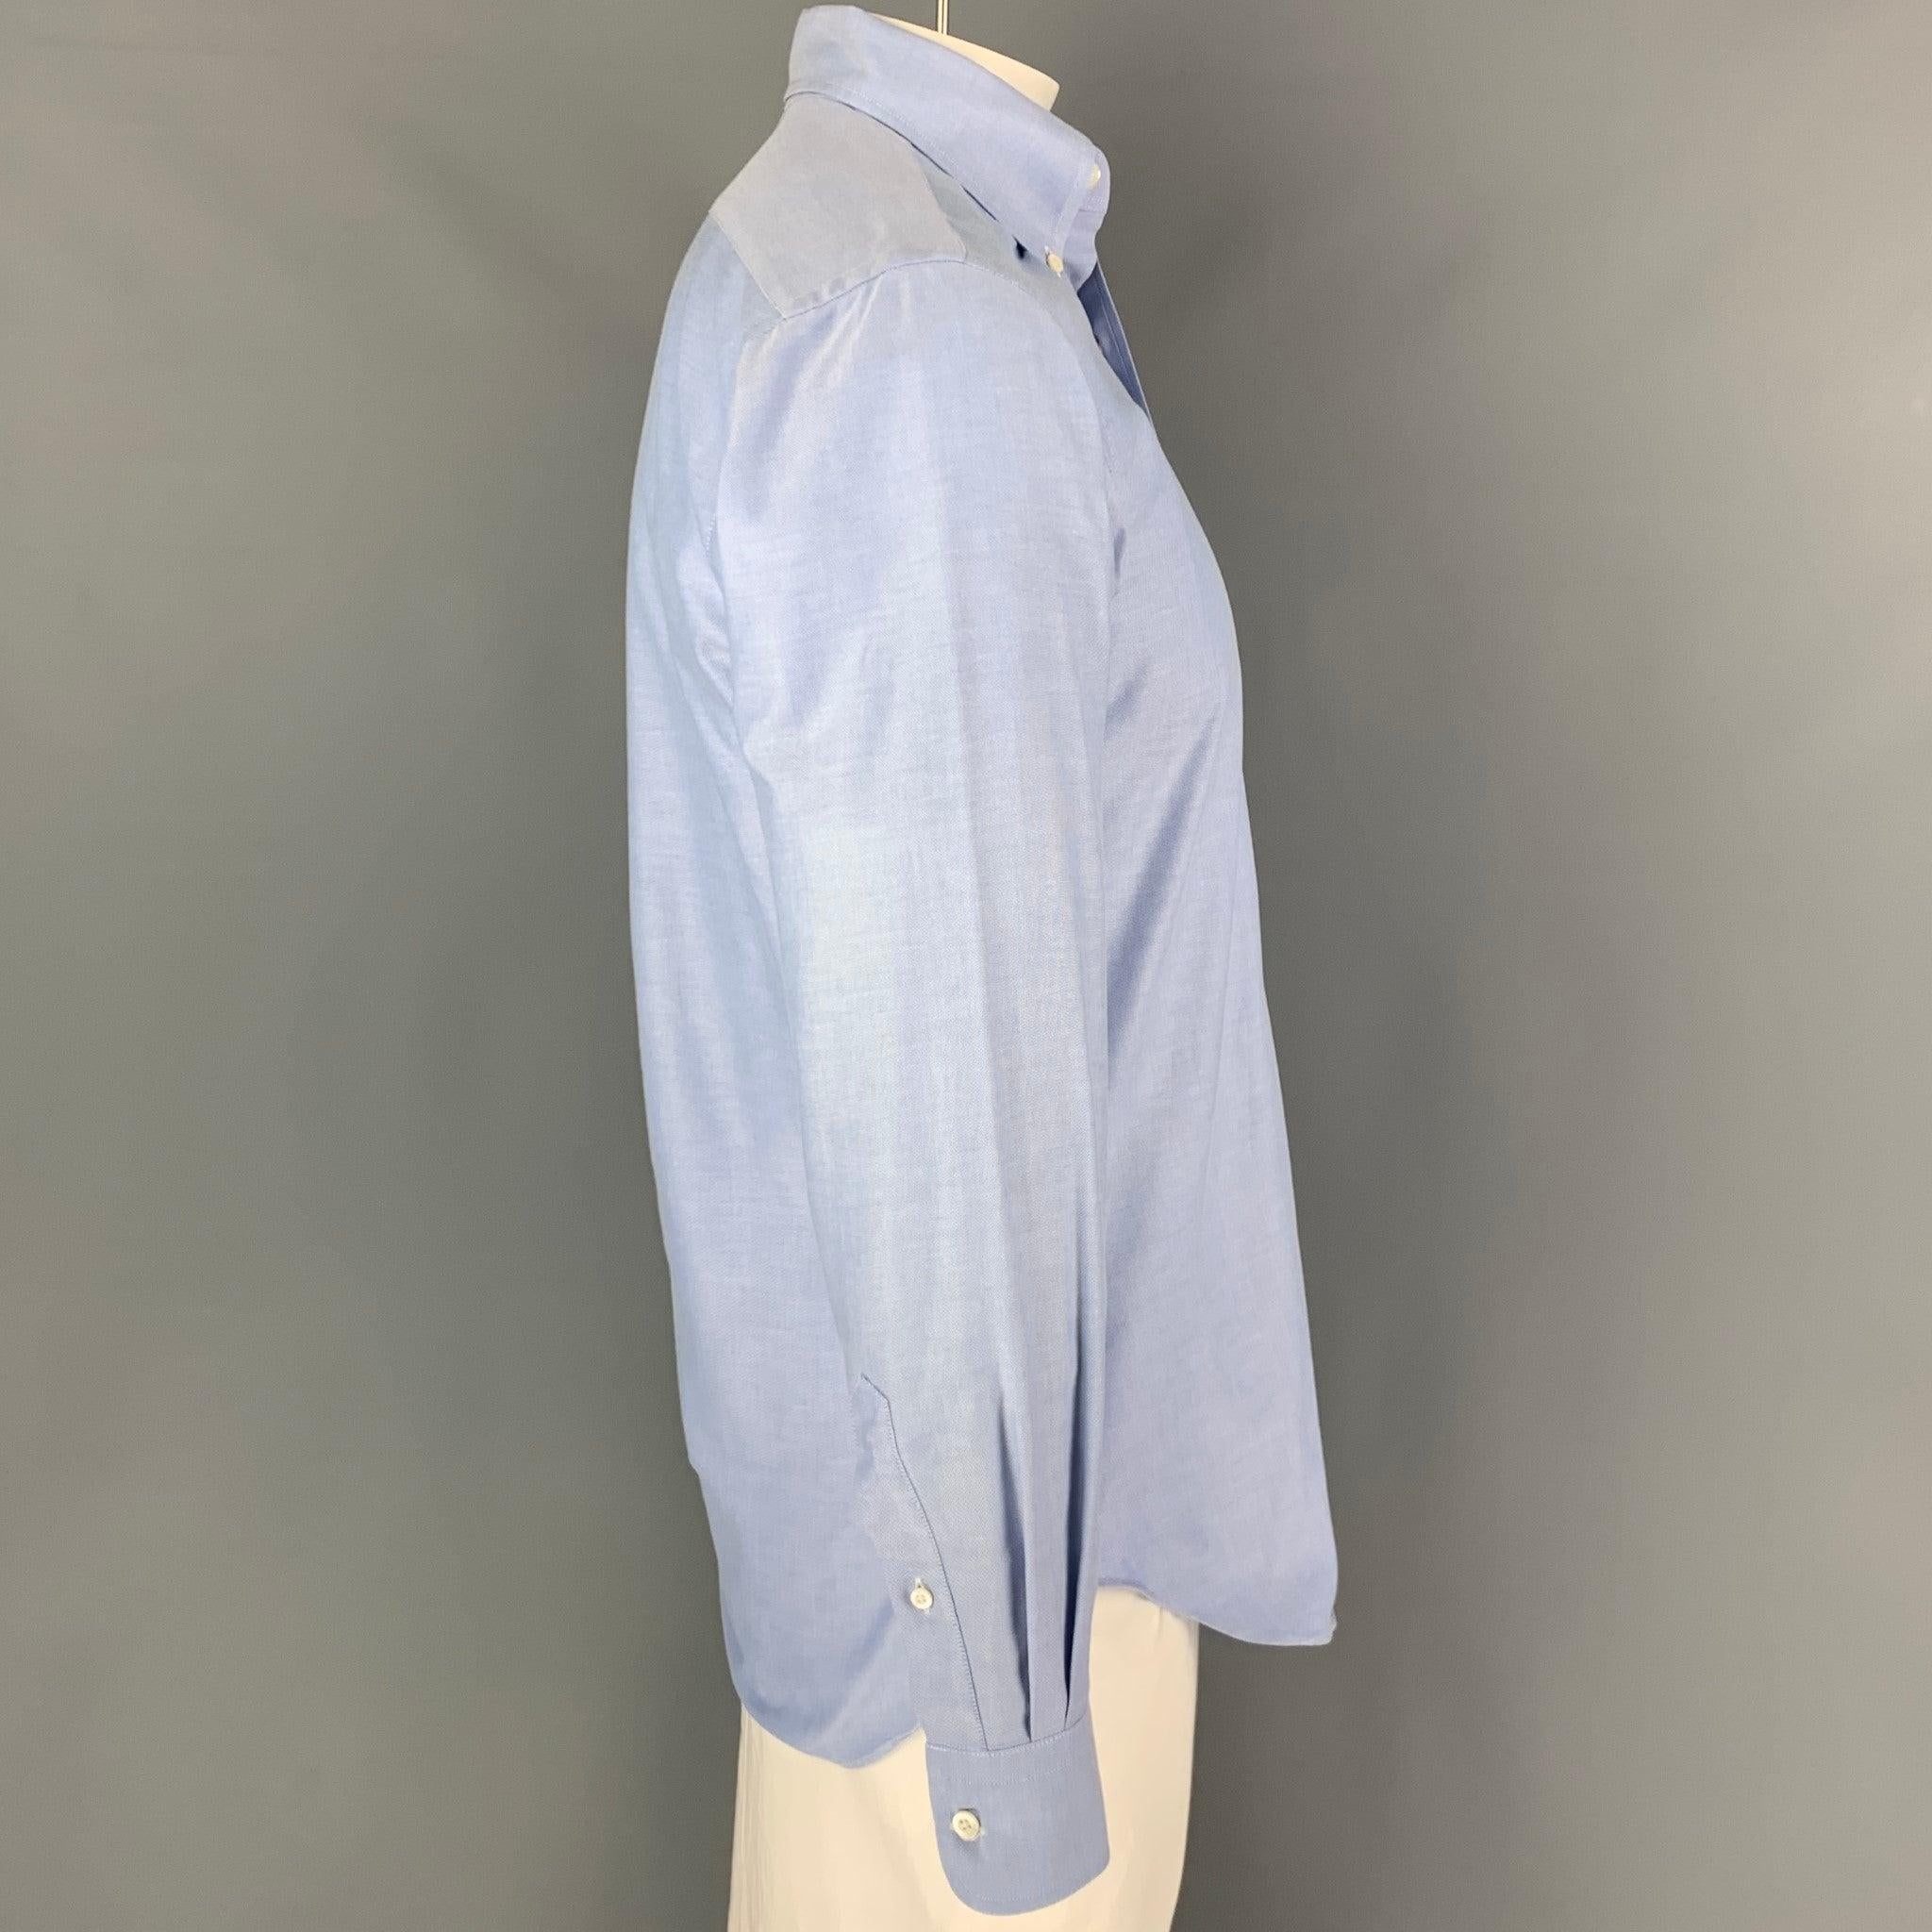 HAMILTON long sleeve shirt comes in a blue oxford material featuring a classic style, button down collar, and a button up closure. Excellent
Pre-Owned Condition. Fabric tag removed.  

Marked:   MARCH18  

Measurements: 
 
Shoulder: 18 inches Chest: